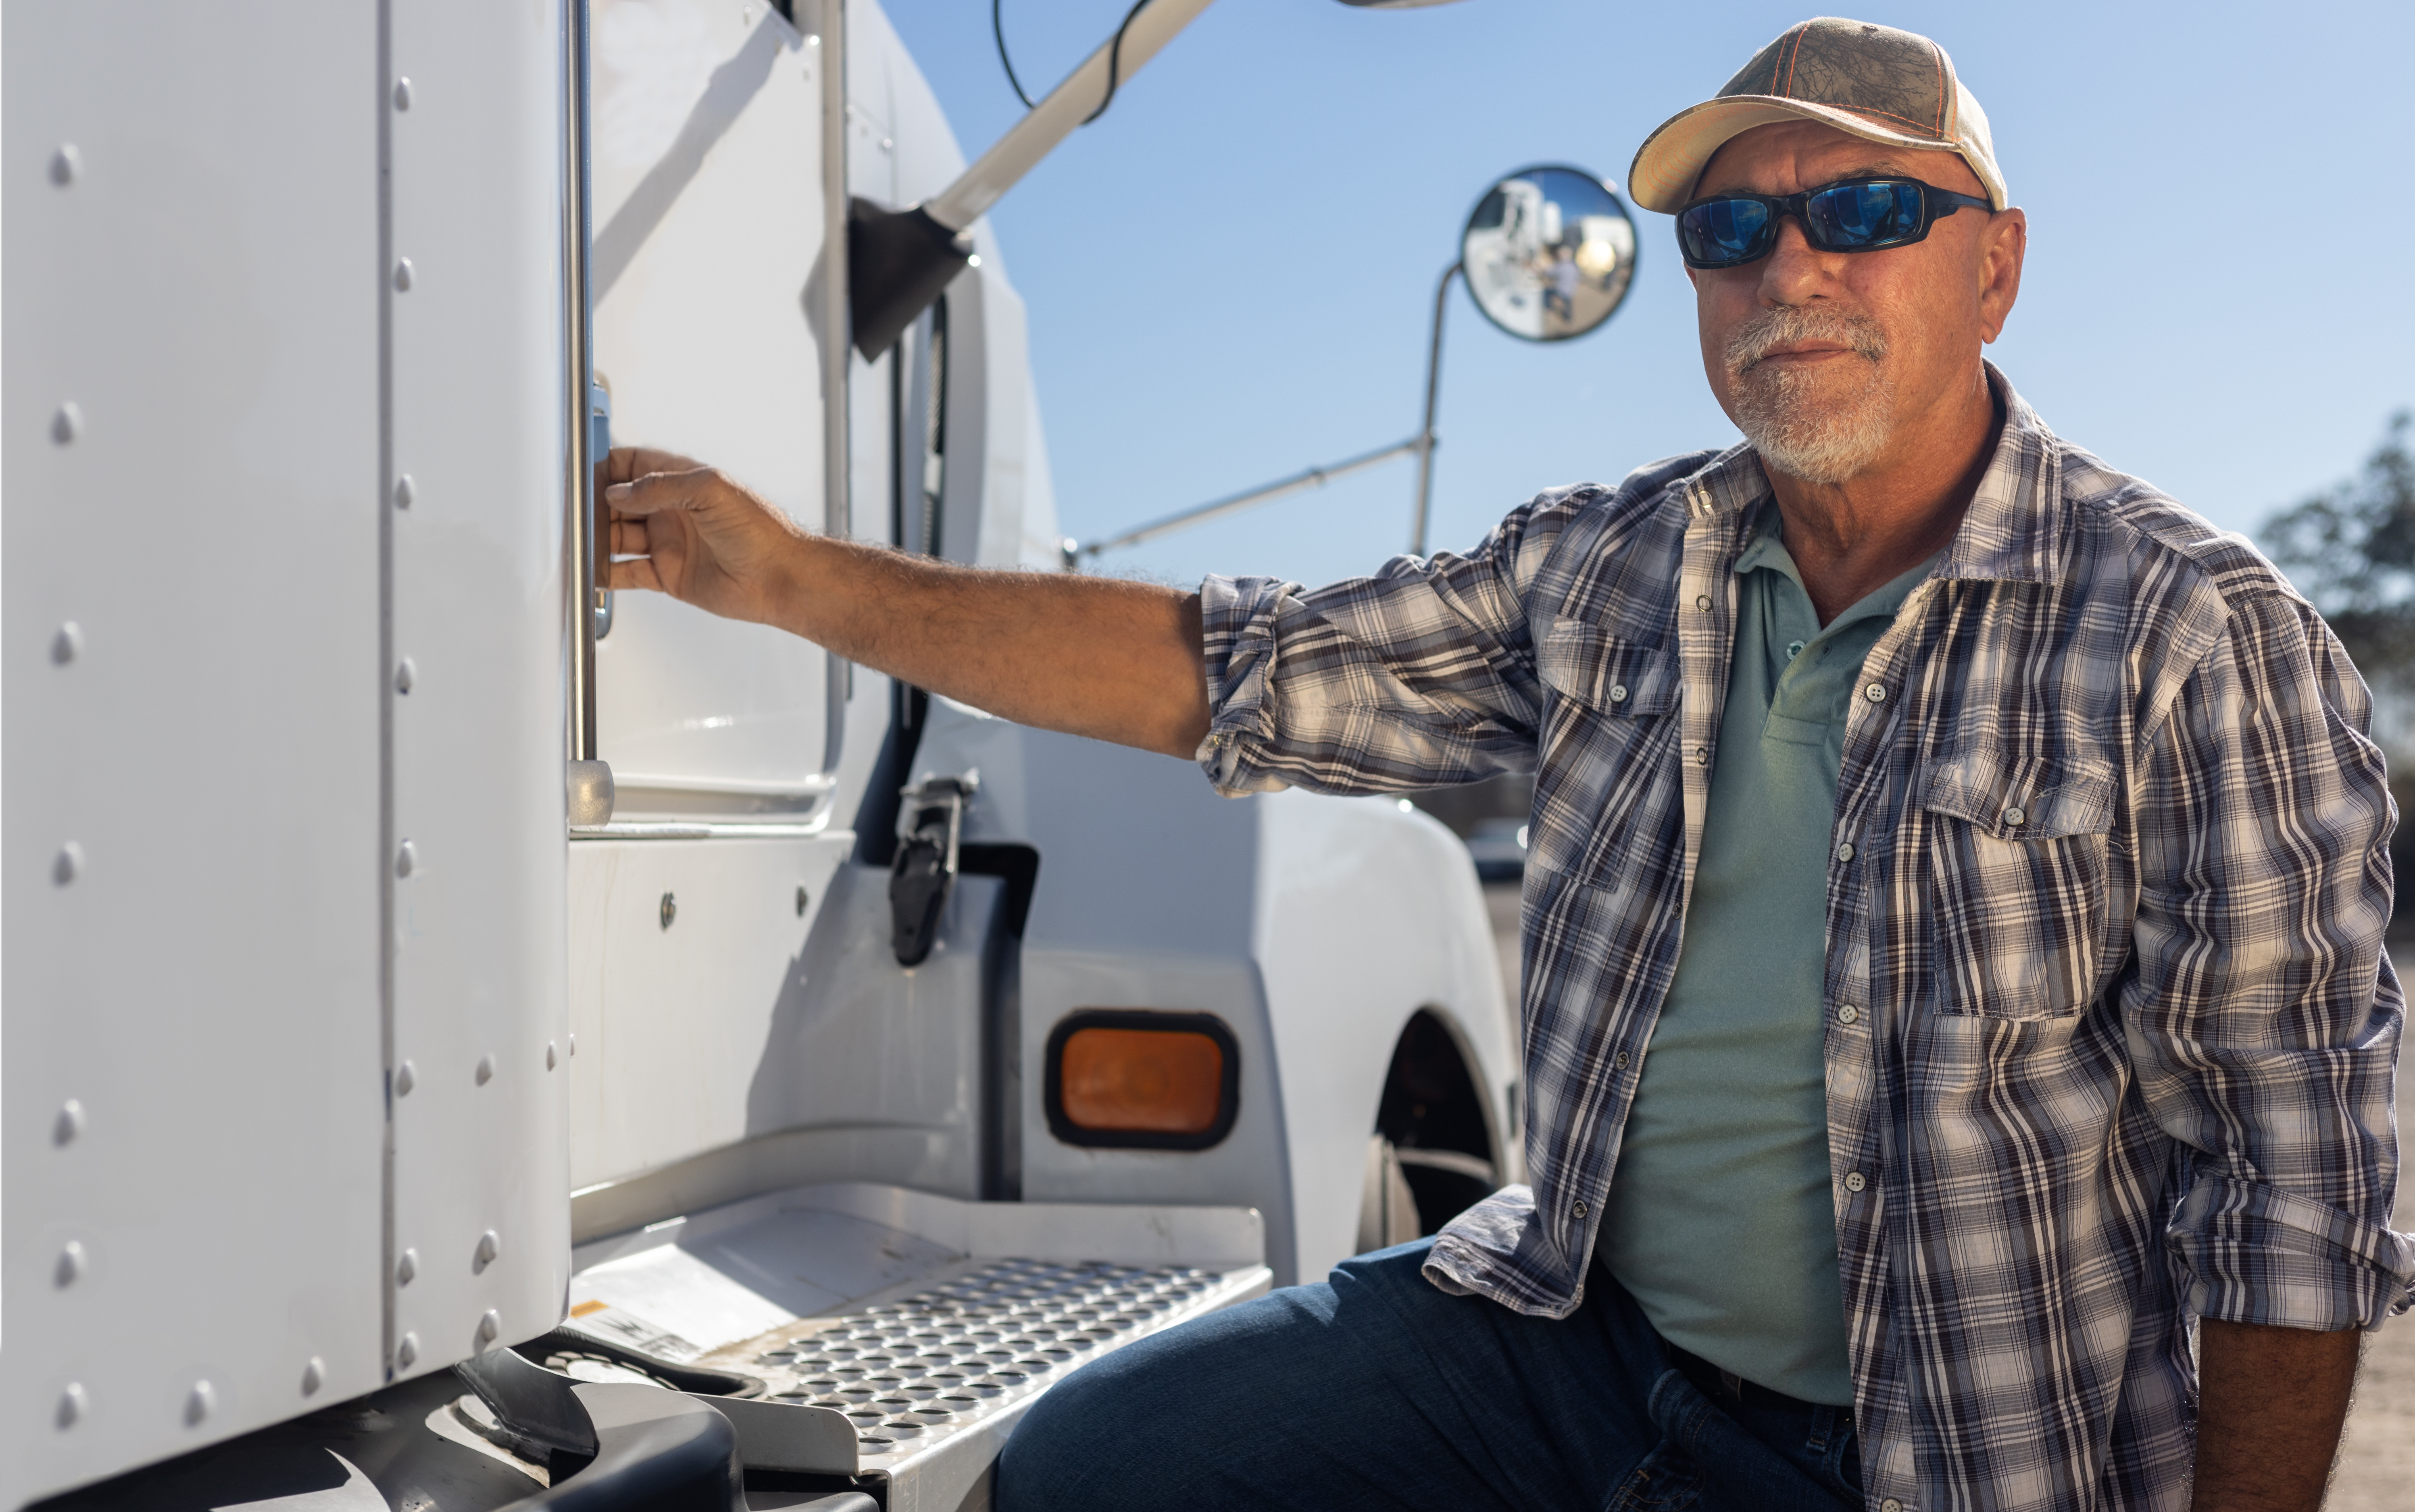 Middle aged semi truck driver sits next to truck. | Source: Shutterstock